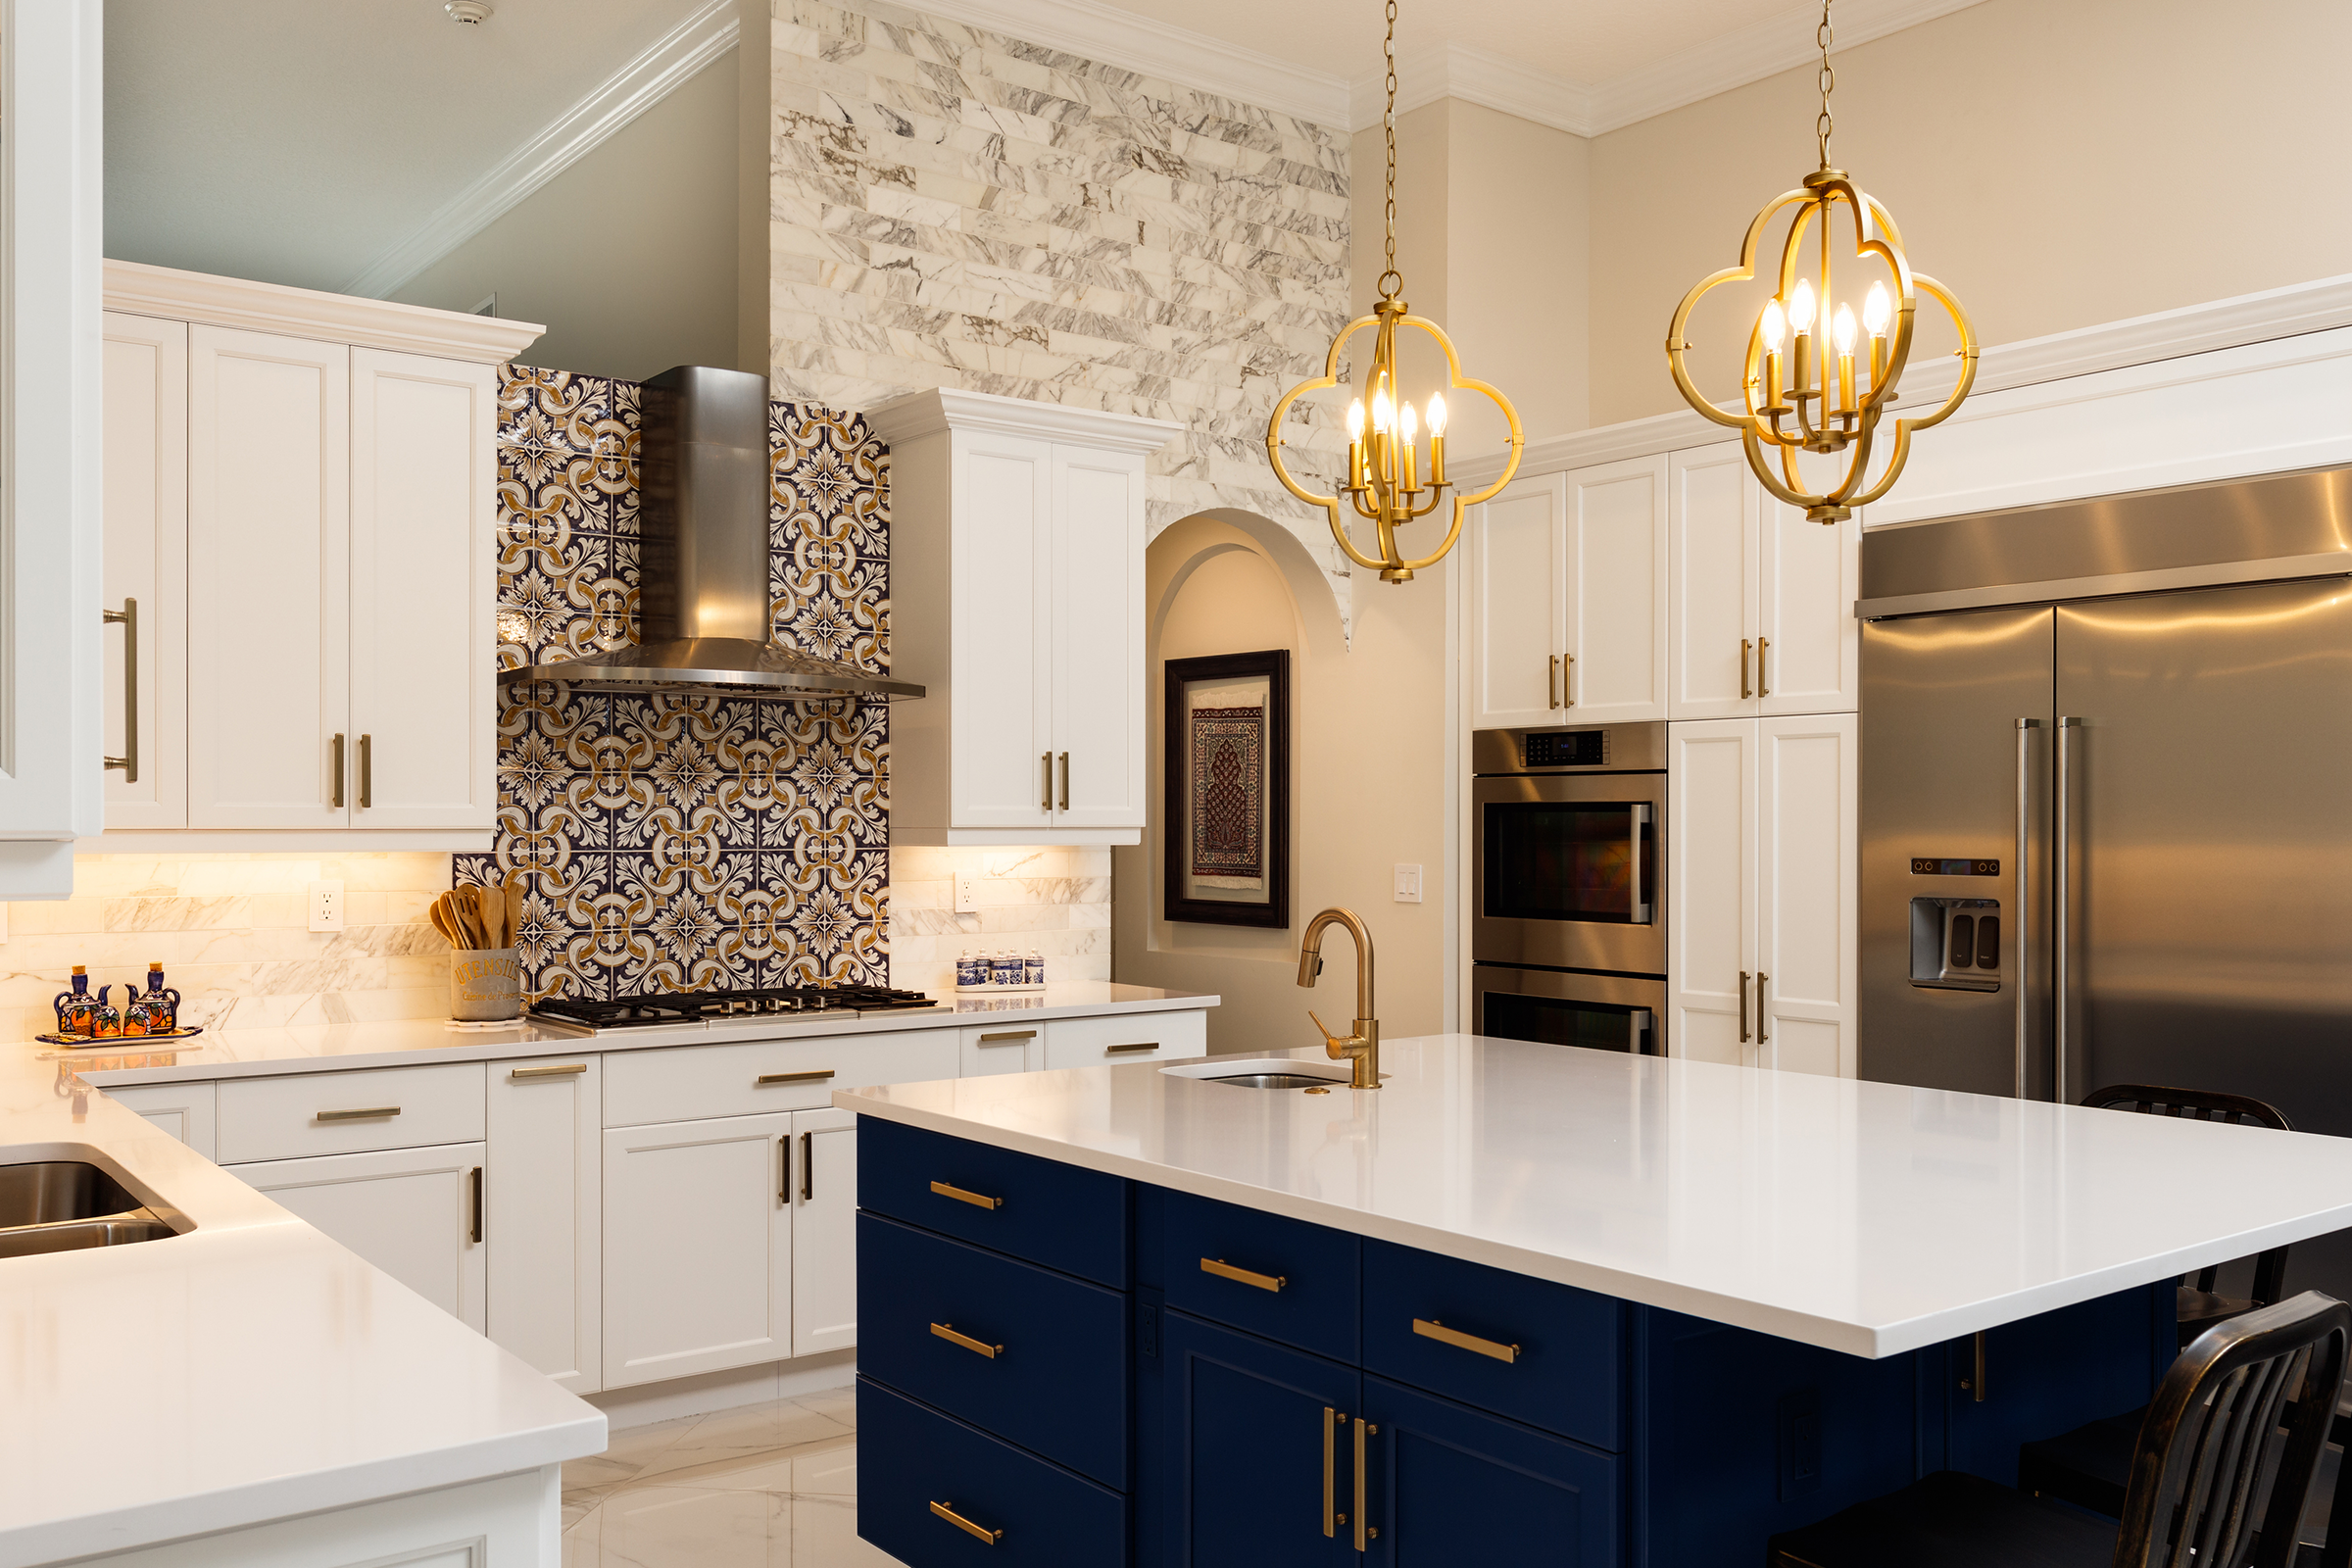 Inspired by cultural design? Grace homes offers custom themed DESIGNS.